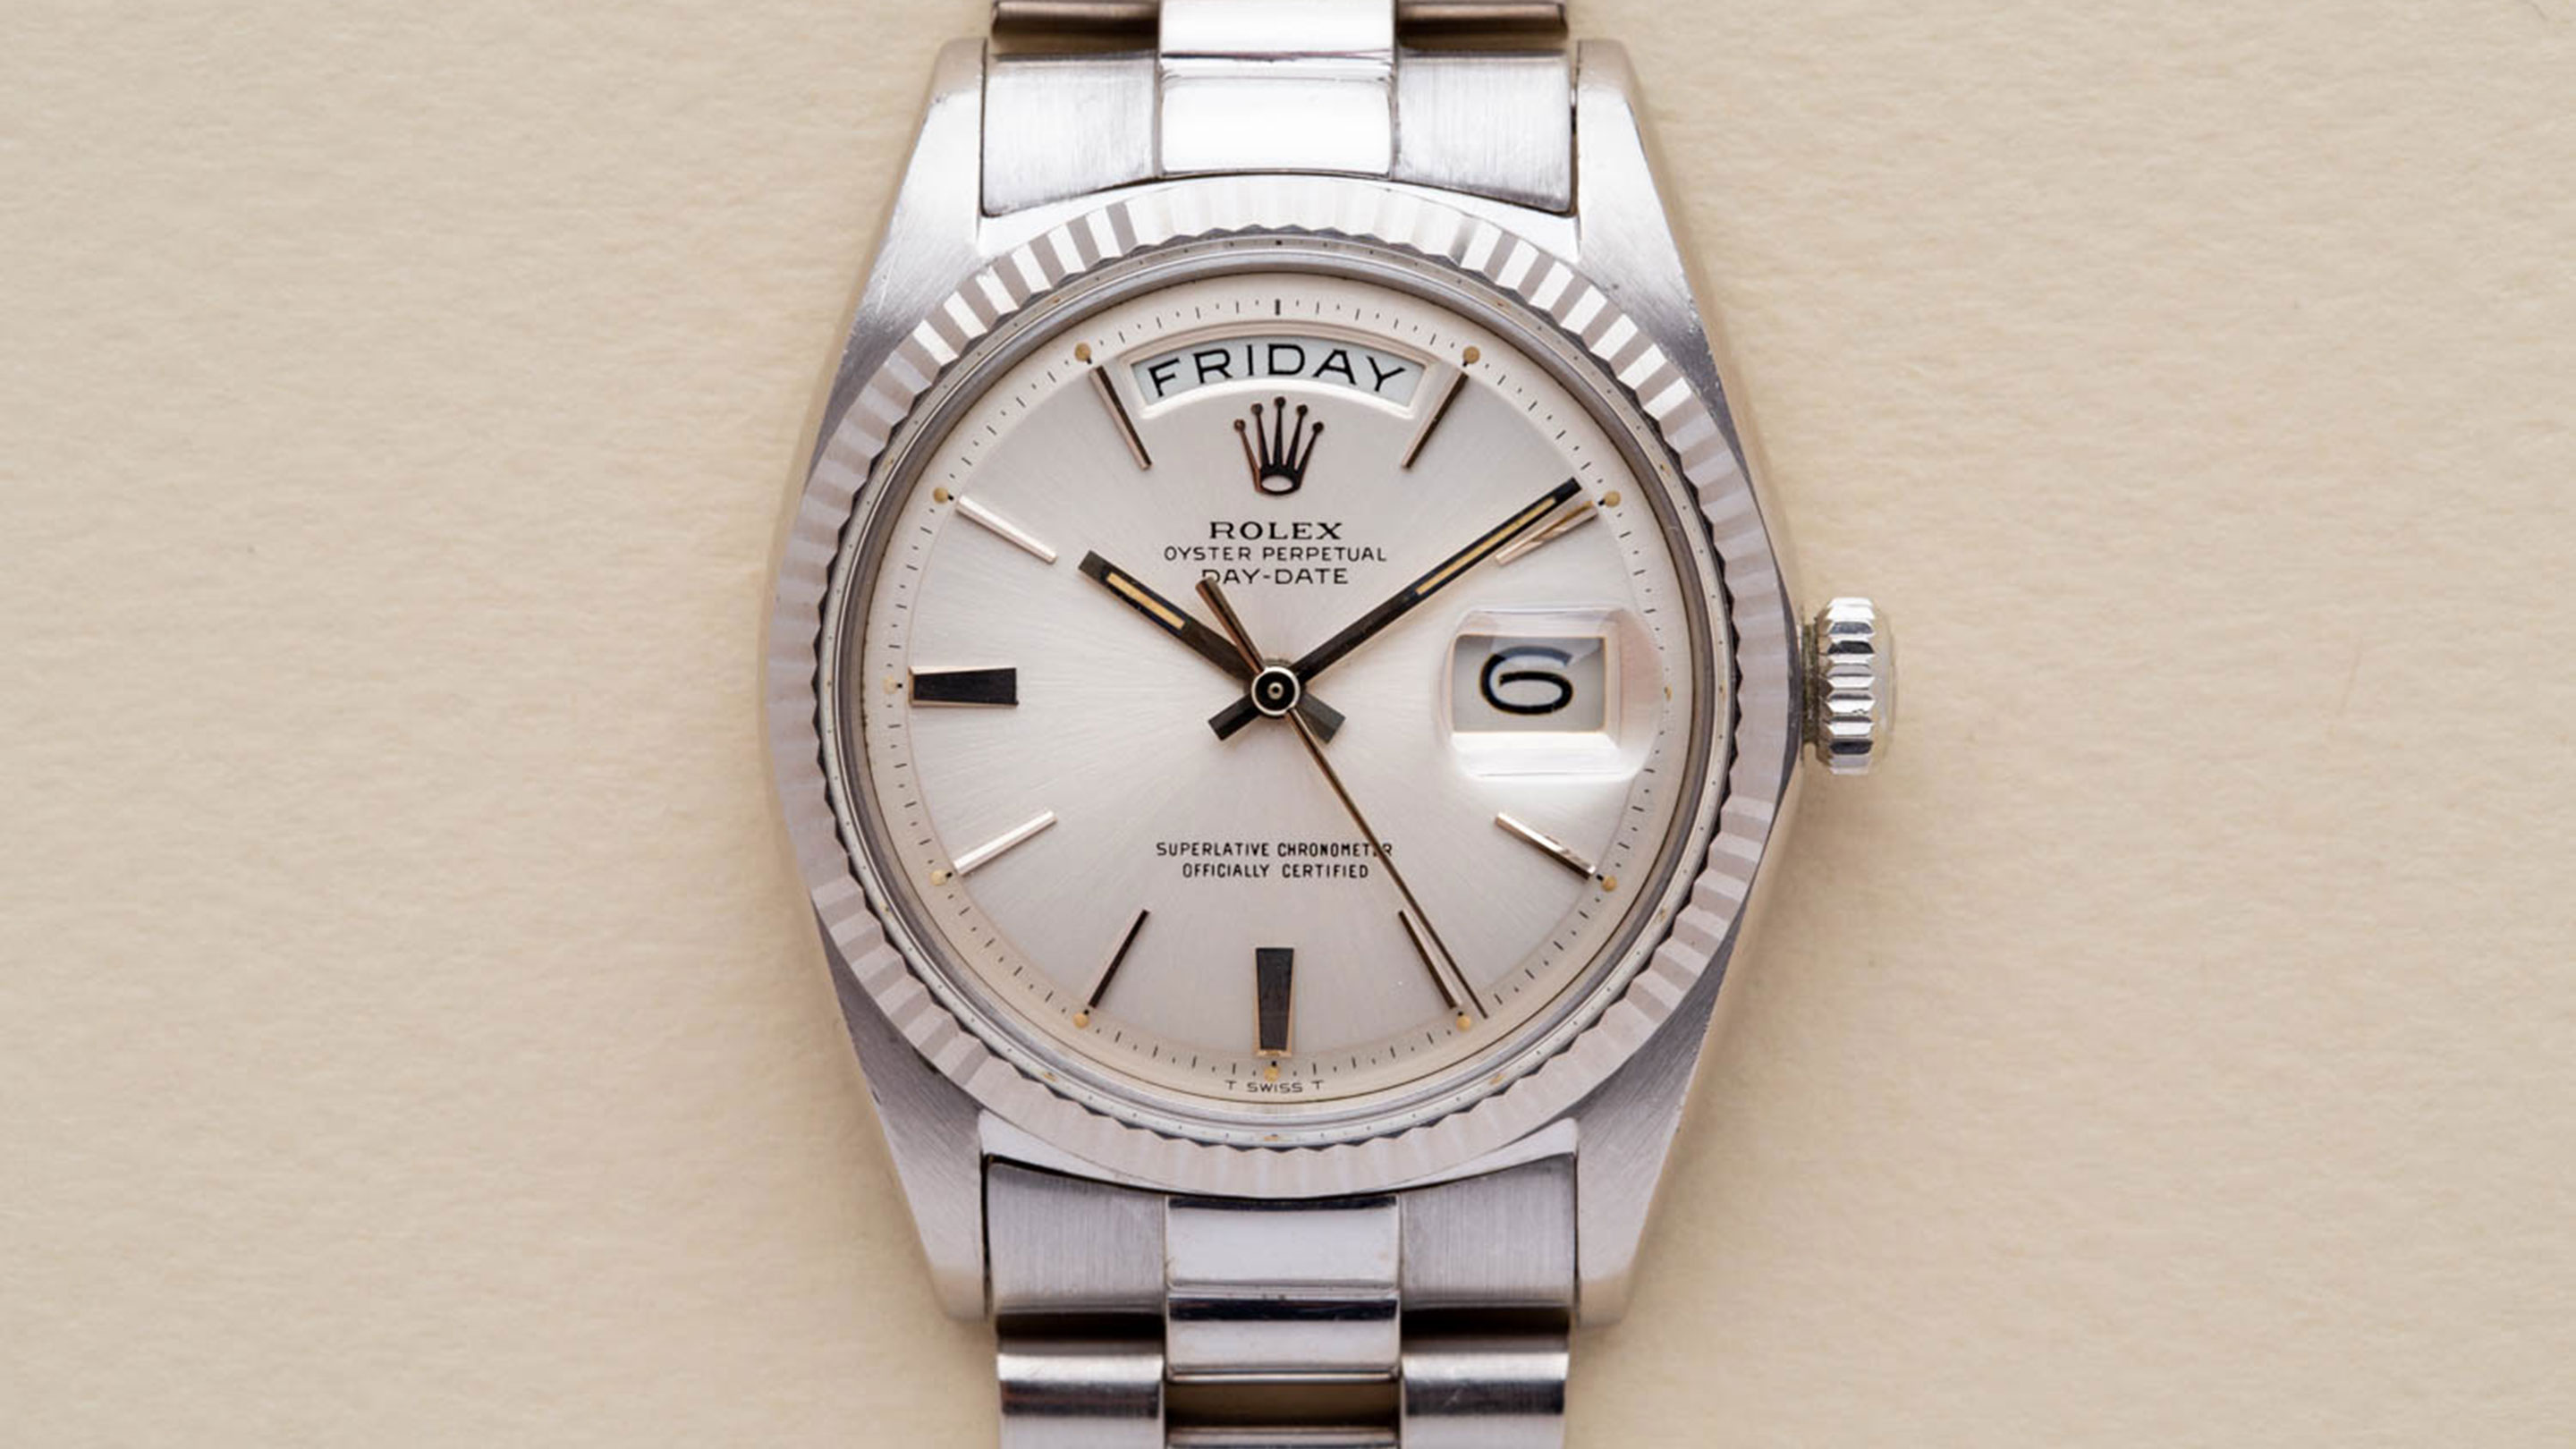 rolex oyster perpetual day date t swiss made t